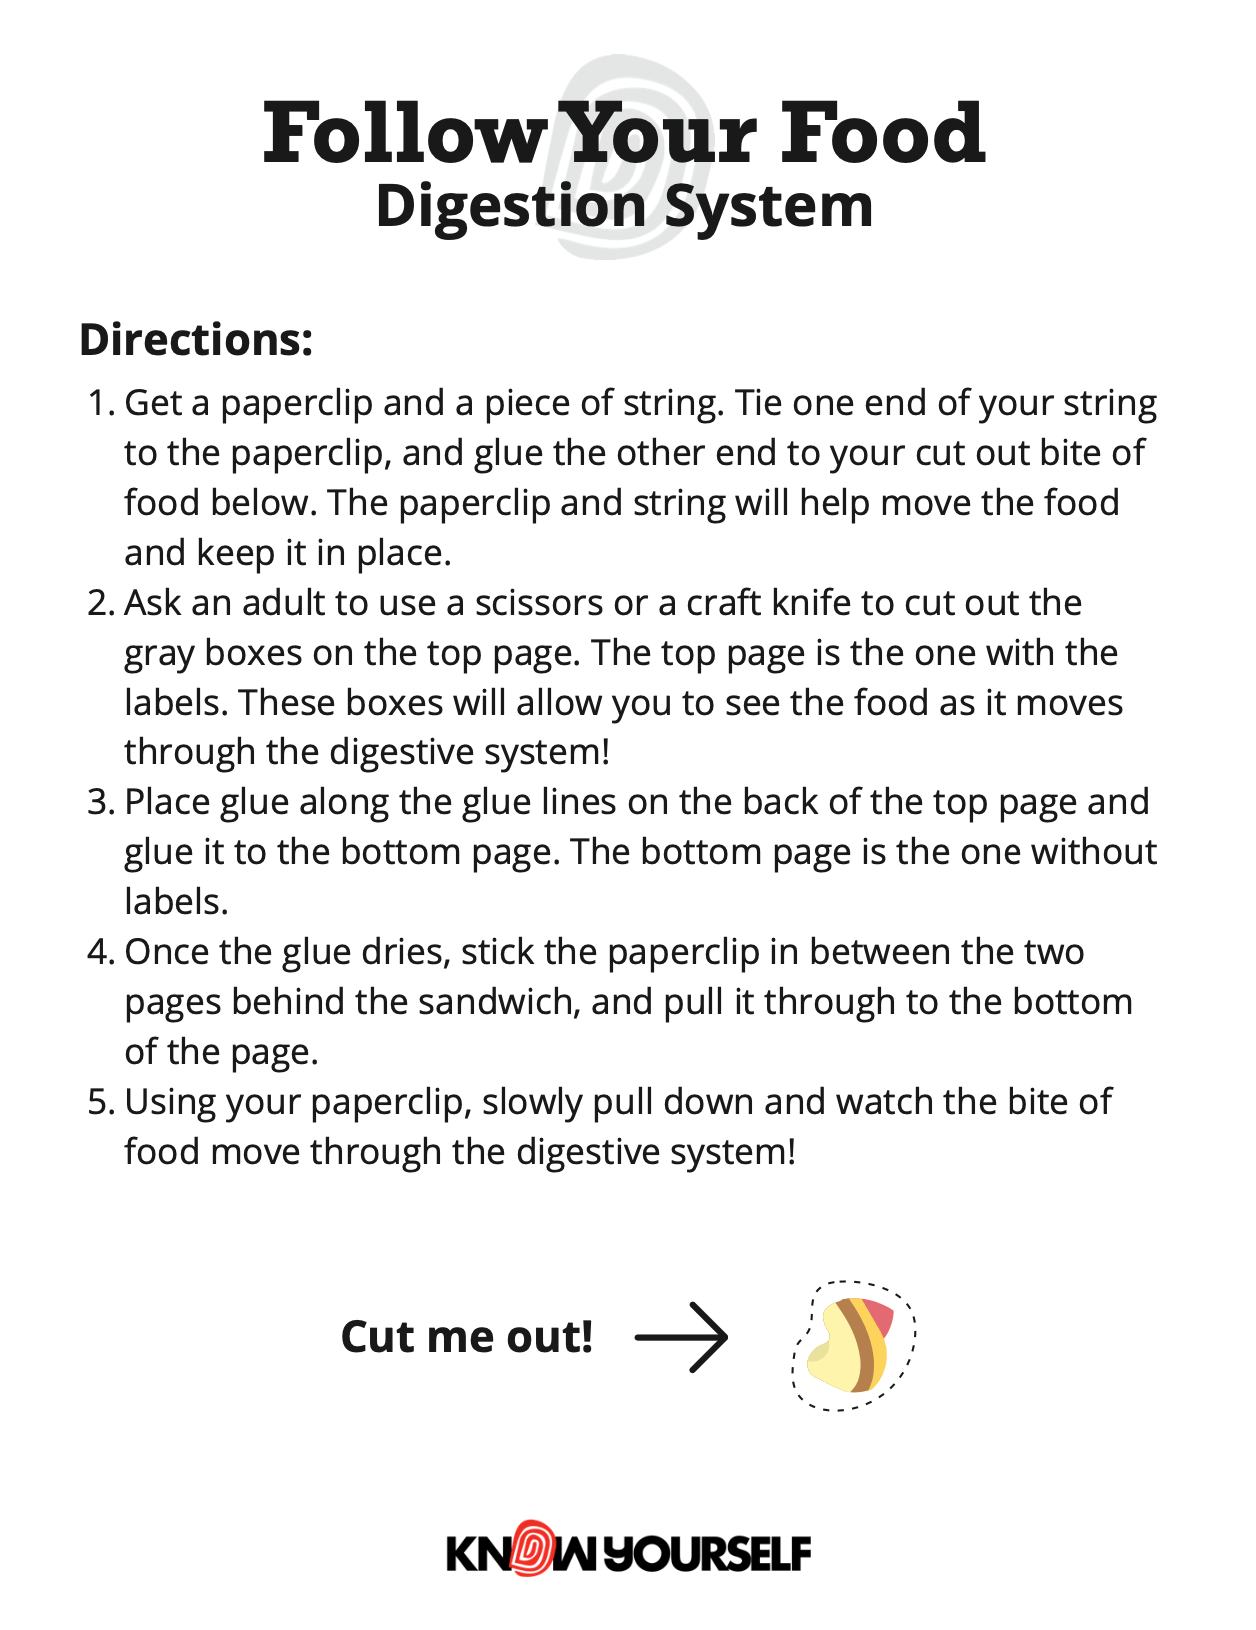 Digestive System Follow Your Food Activity Health Education for Children